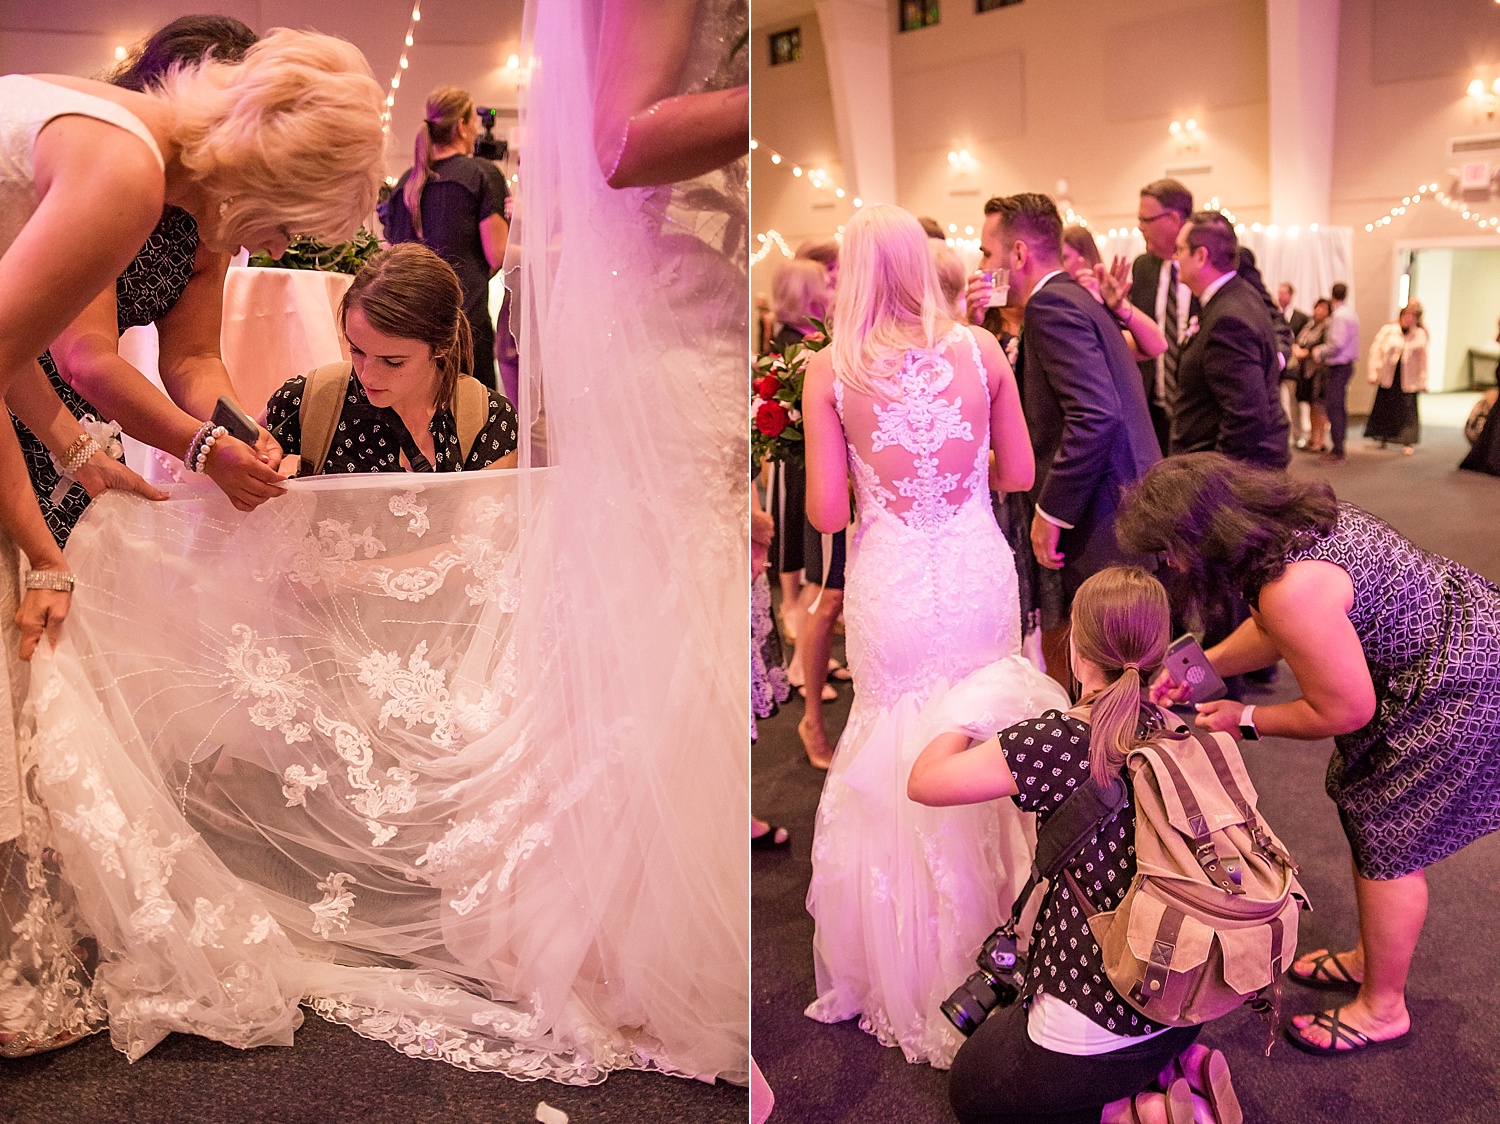  As a wedding photographer, it's also very helpful to know how to bustle a dress. I'm still trying my best to improve on this talent but I lend a hand when I can! 